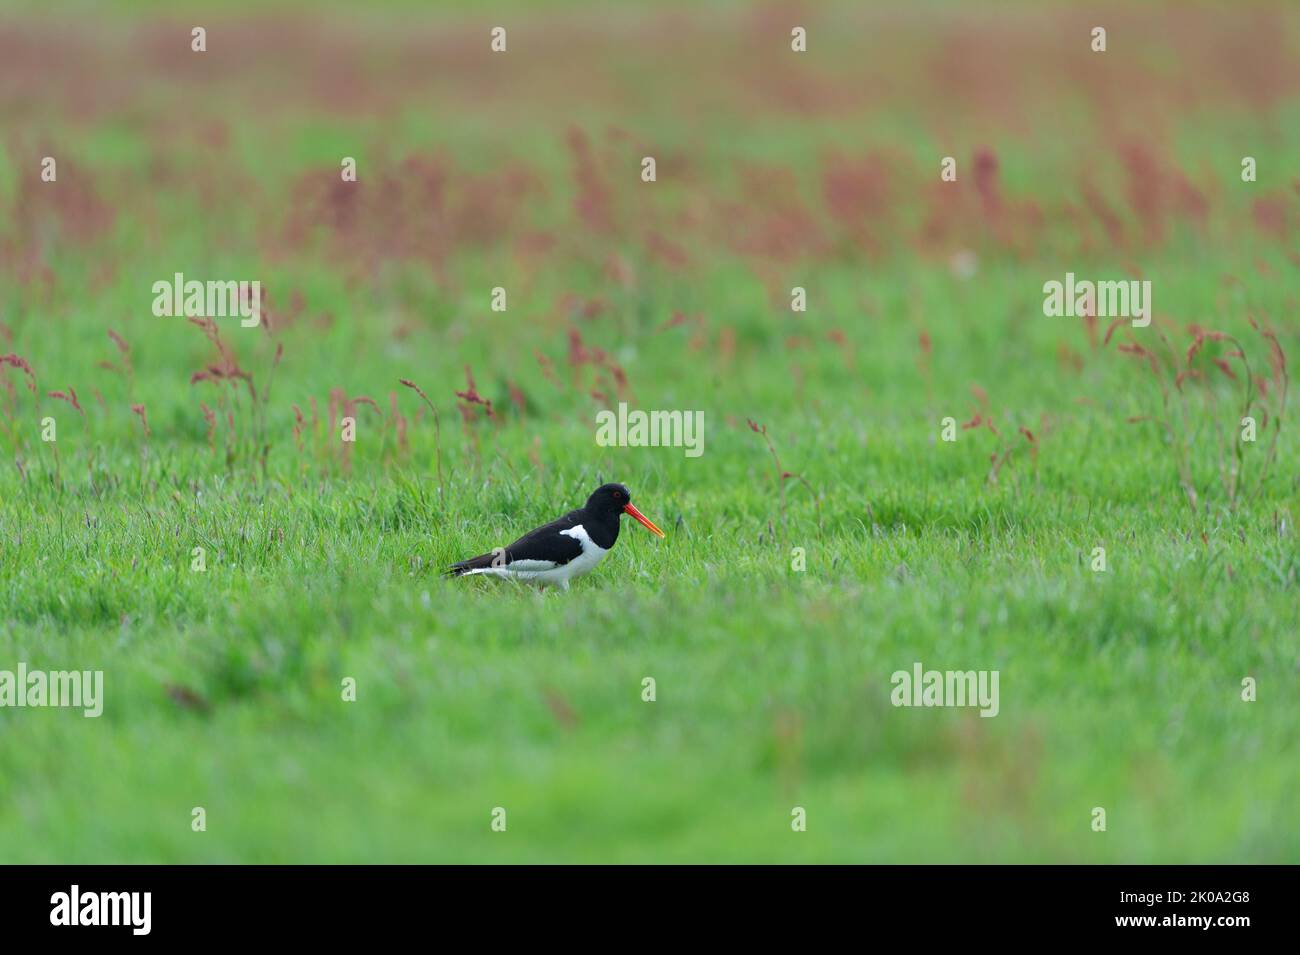 Several oyster catcher in nature landscape with sorrel Stock Photo